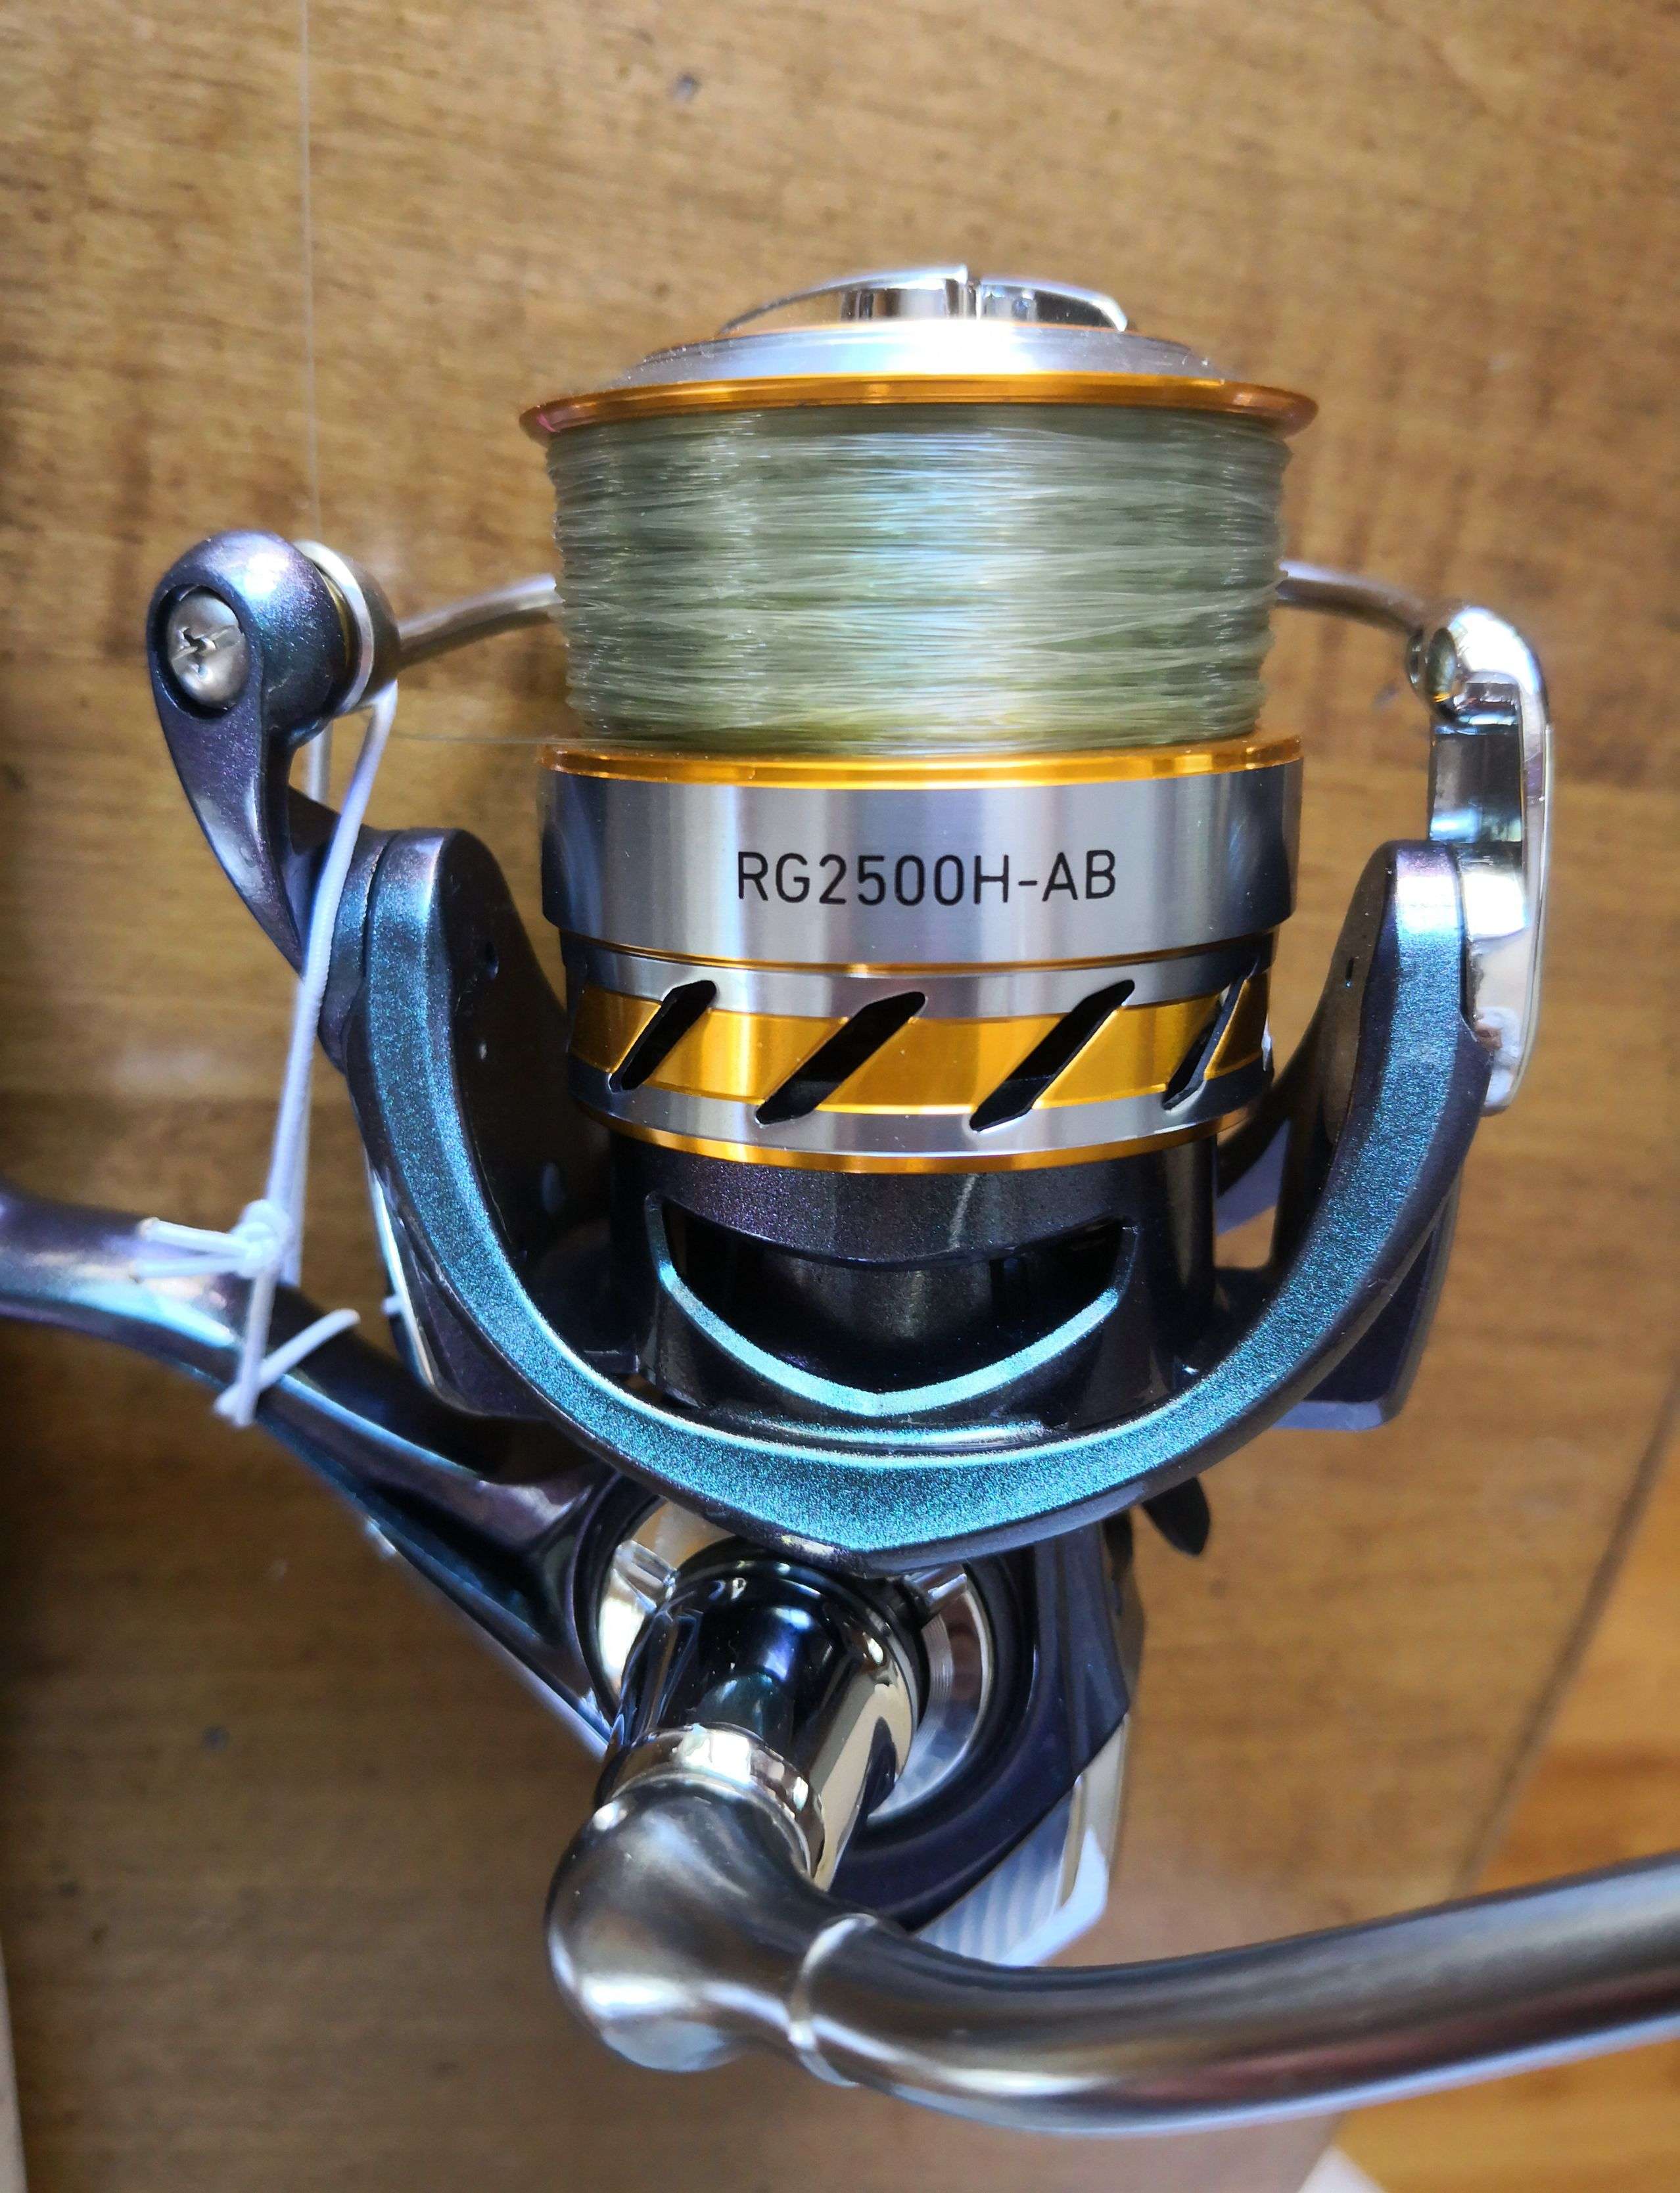 A common spinning reel issue - not the washer - Fishing Rods